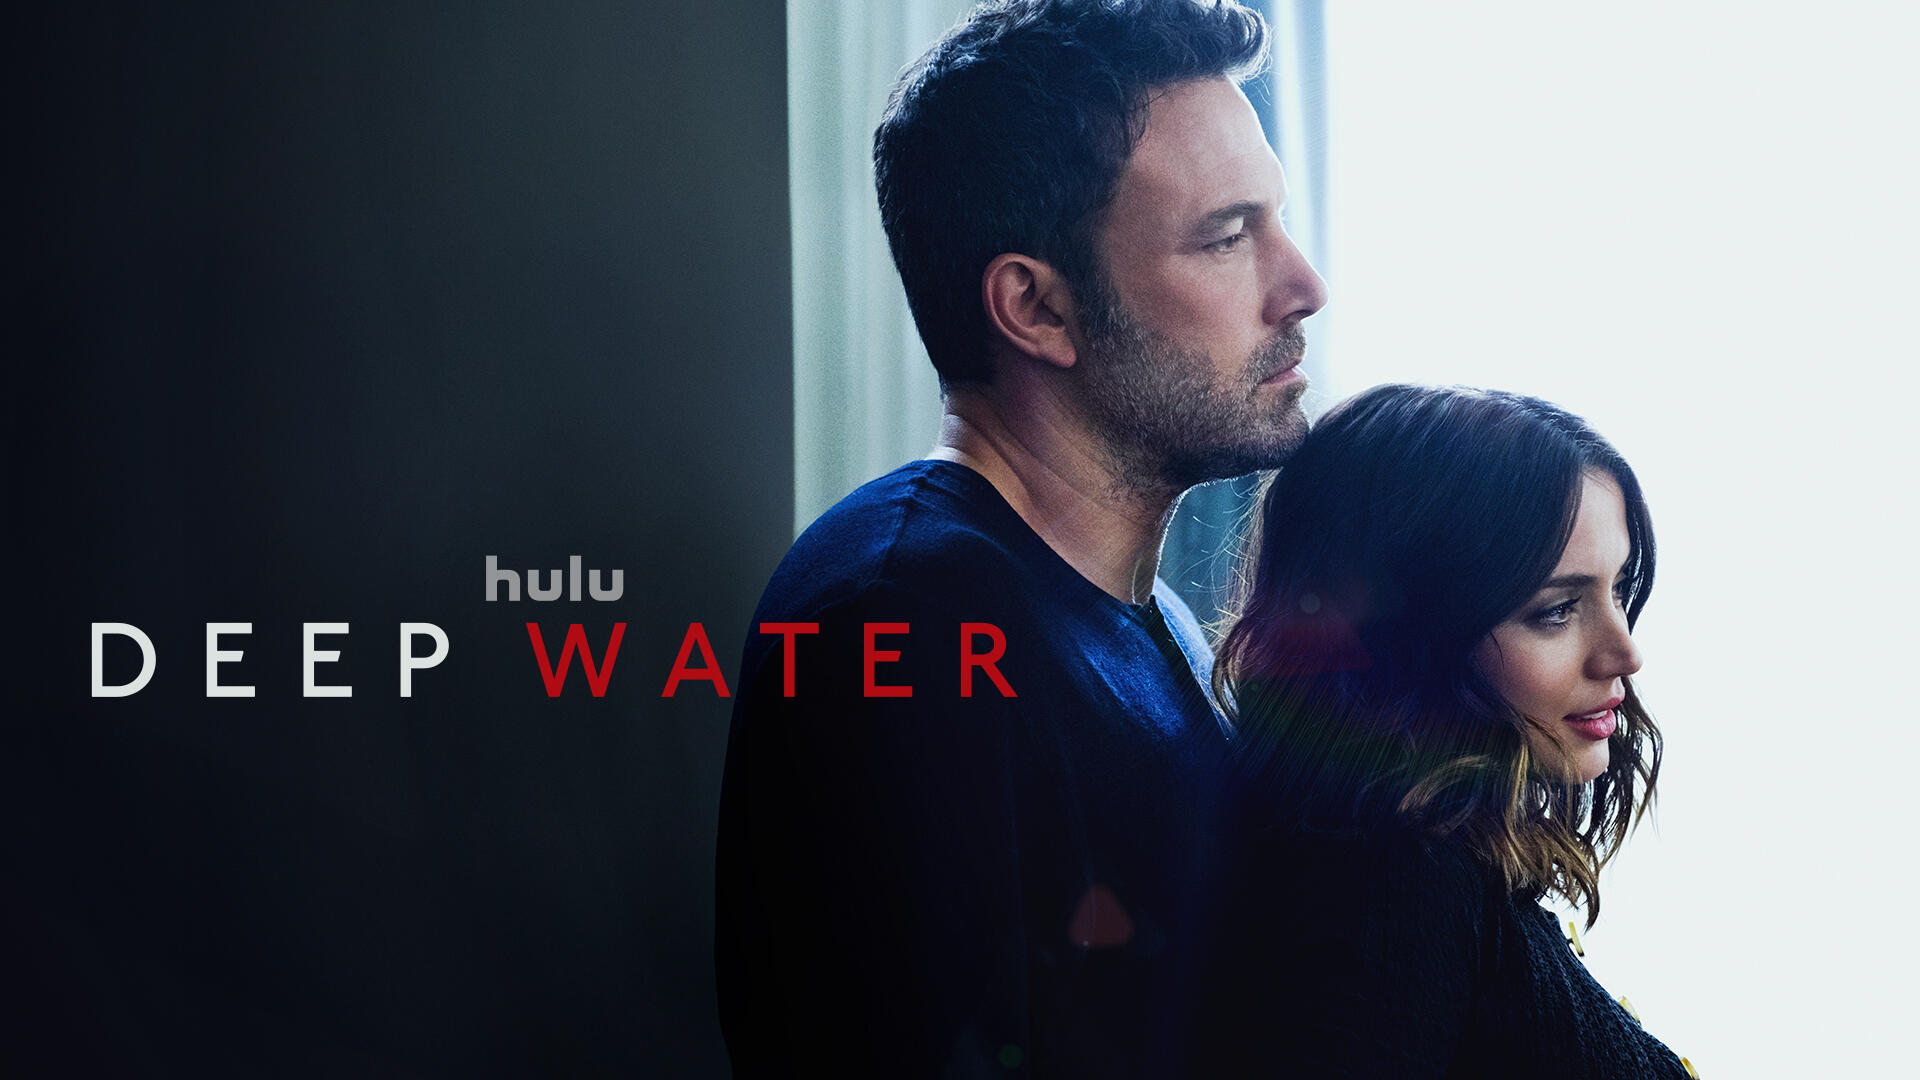 Deep Water -- Based on the celebrated novel by famed mystery writer Patricia Highsmith (The Talented Mr. Ripley), “Deep Water” takes us inside the marriage of picture-perfect Vic (Ben Affleck) and Melinda (Ana de Armas) Van Allen to discover the dangerous mind games they play and what happens to the people that get caught up in them. Vic (Ben Affleck) and Melinda (Ana de Armas), shown. (Courtesy of 20th Century Studios)